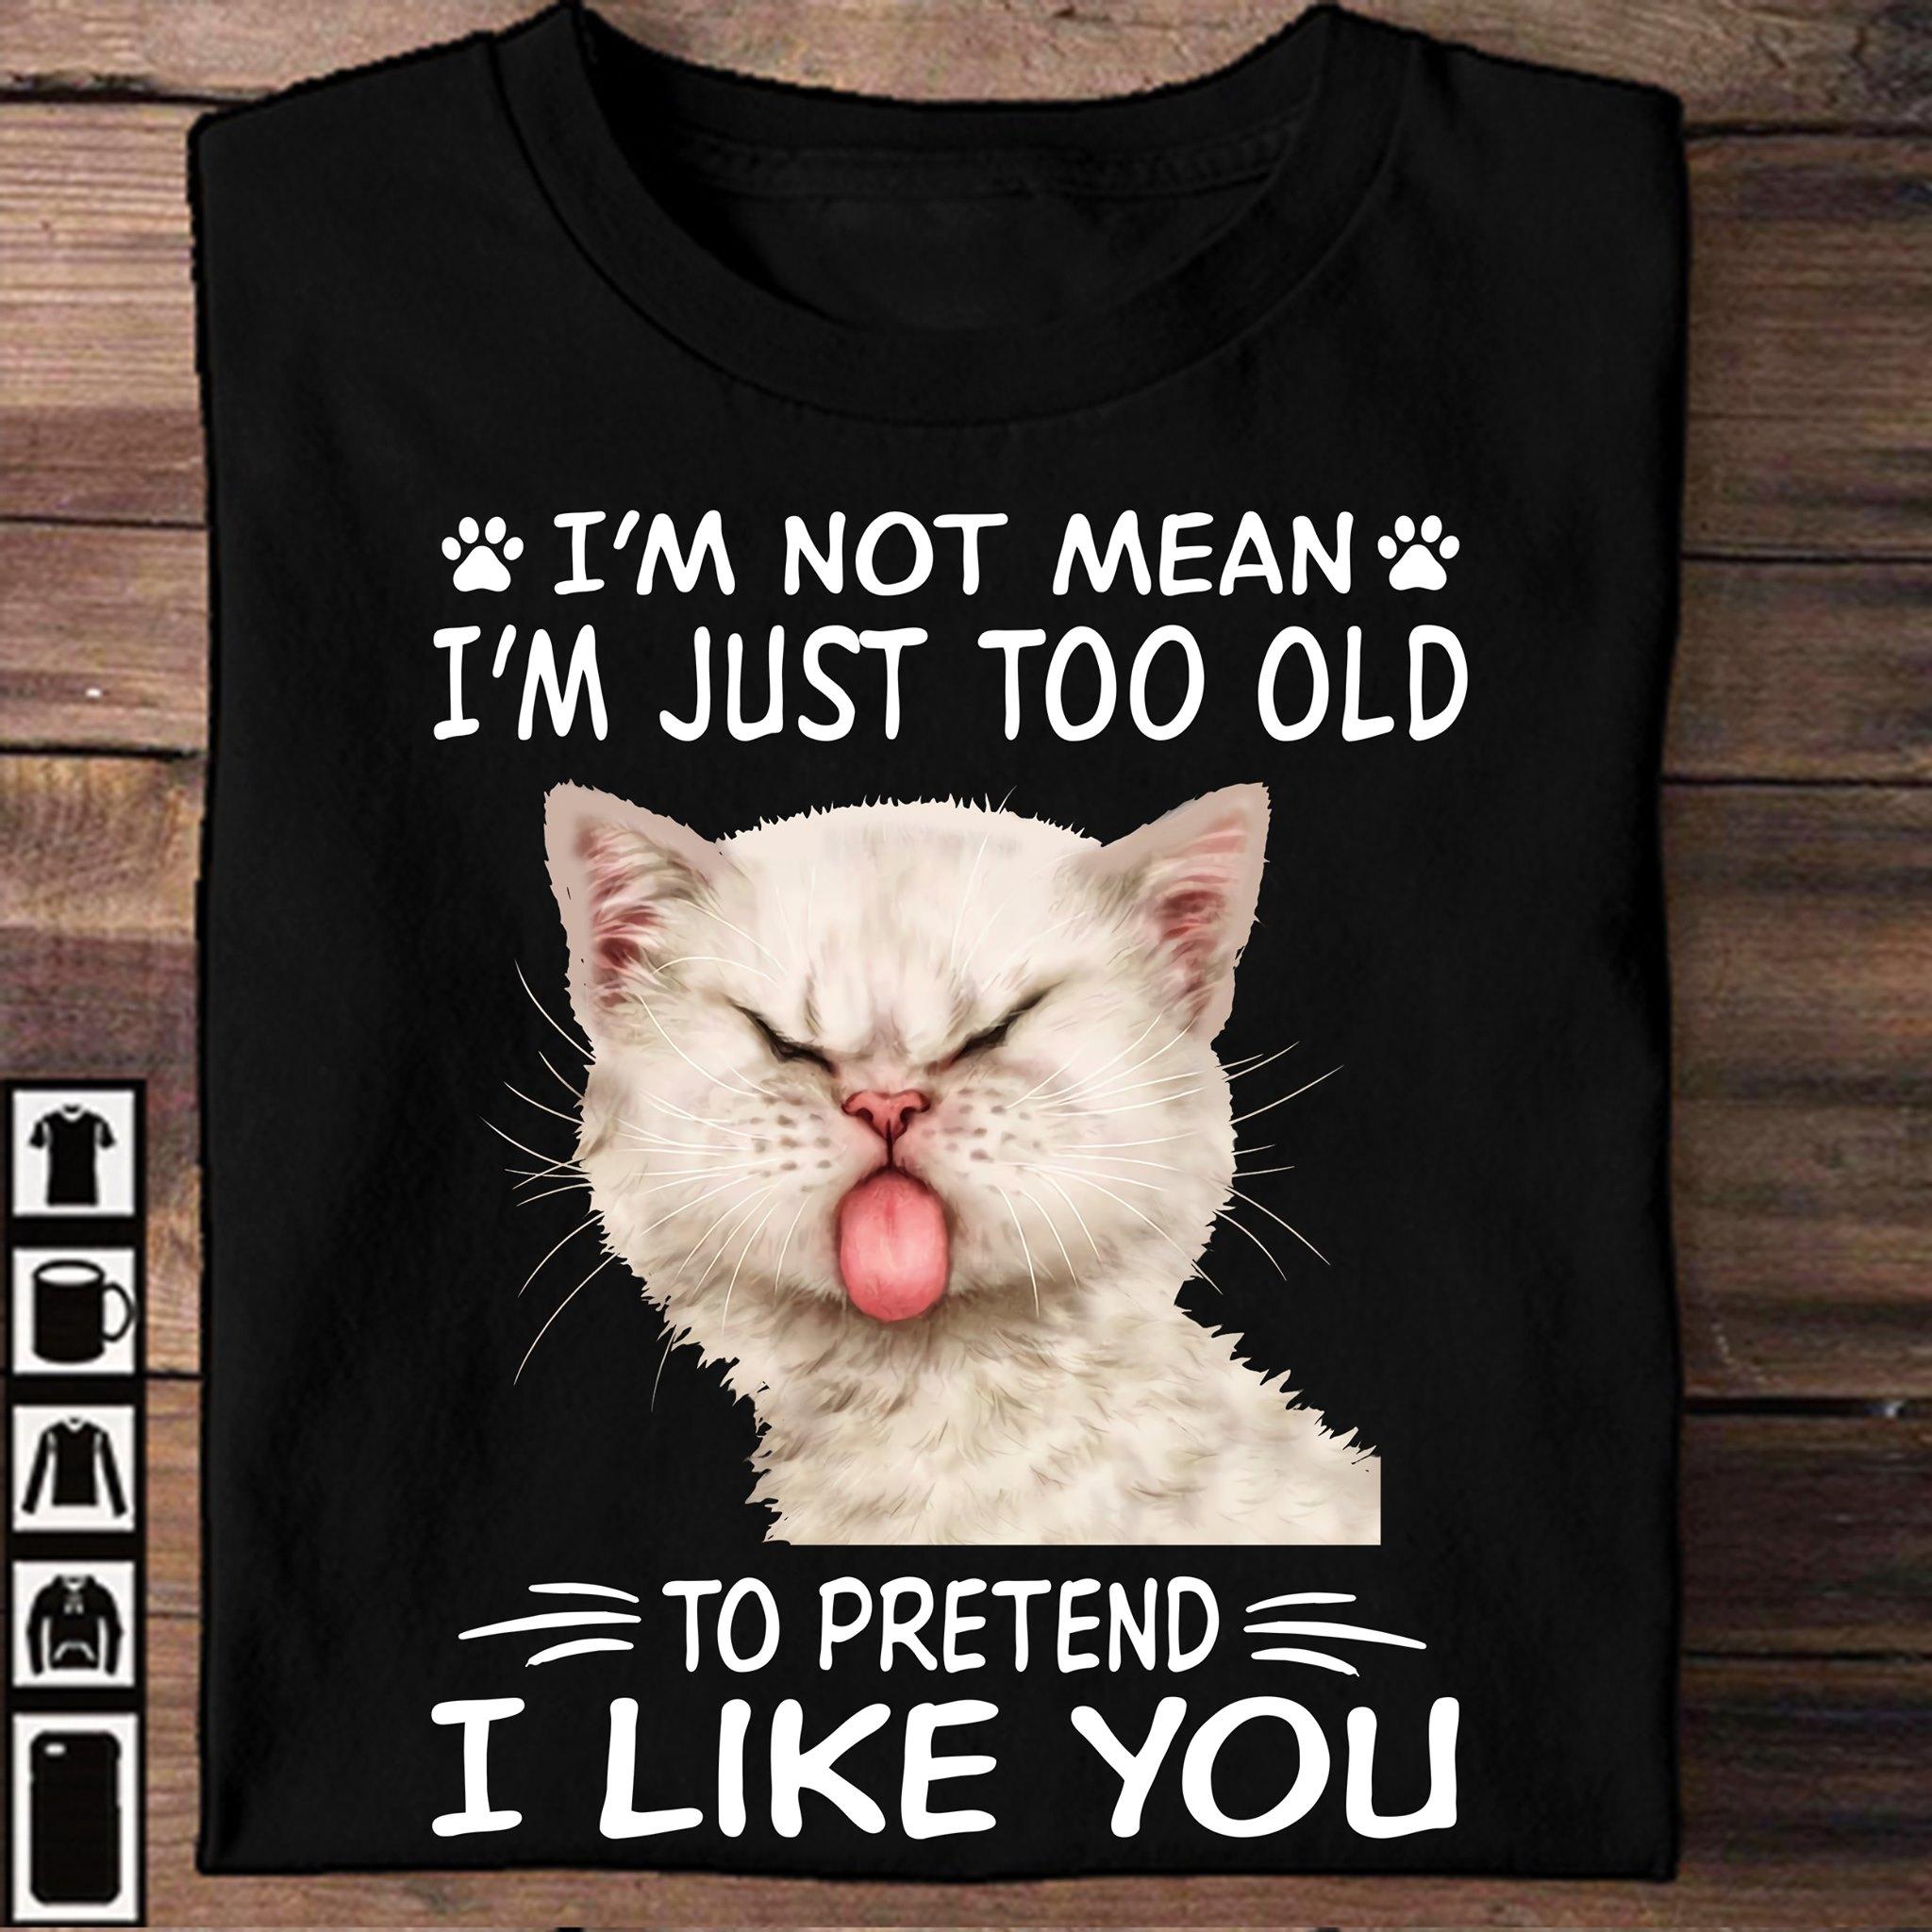 I'm not mean I'm just too old to pretend I like you - Naughty kitty cat, white cat graphic T-shirt